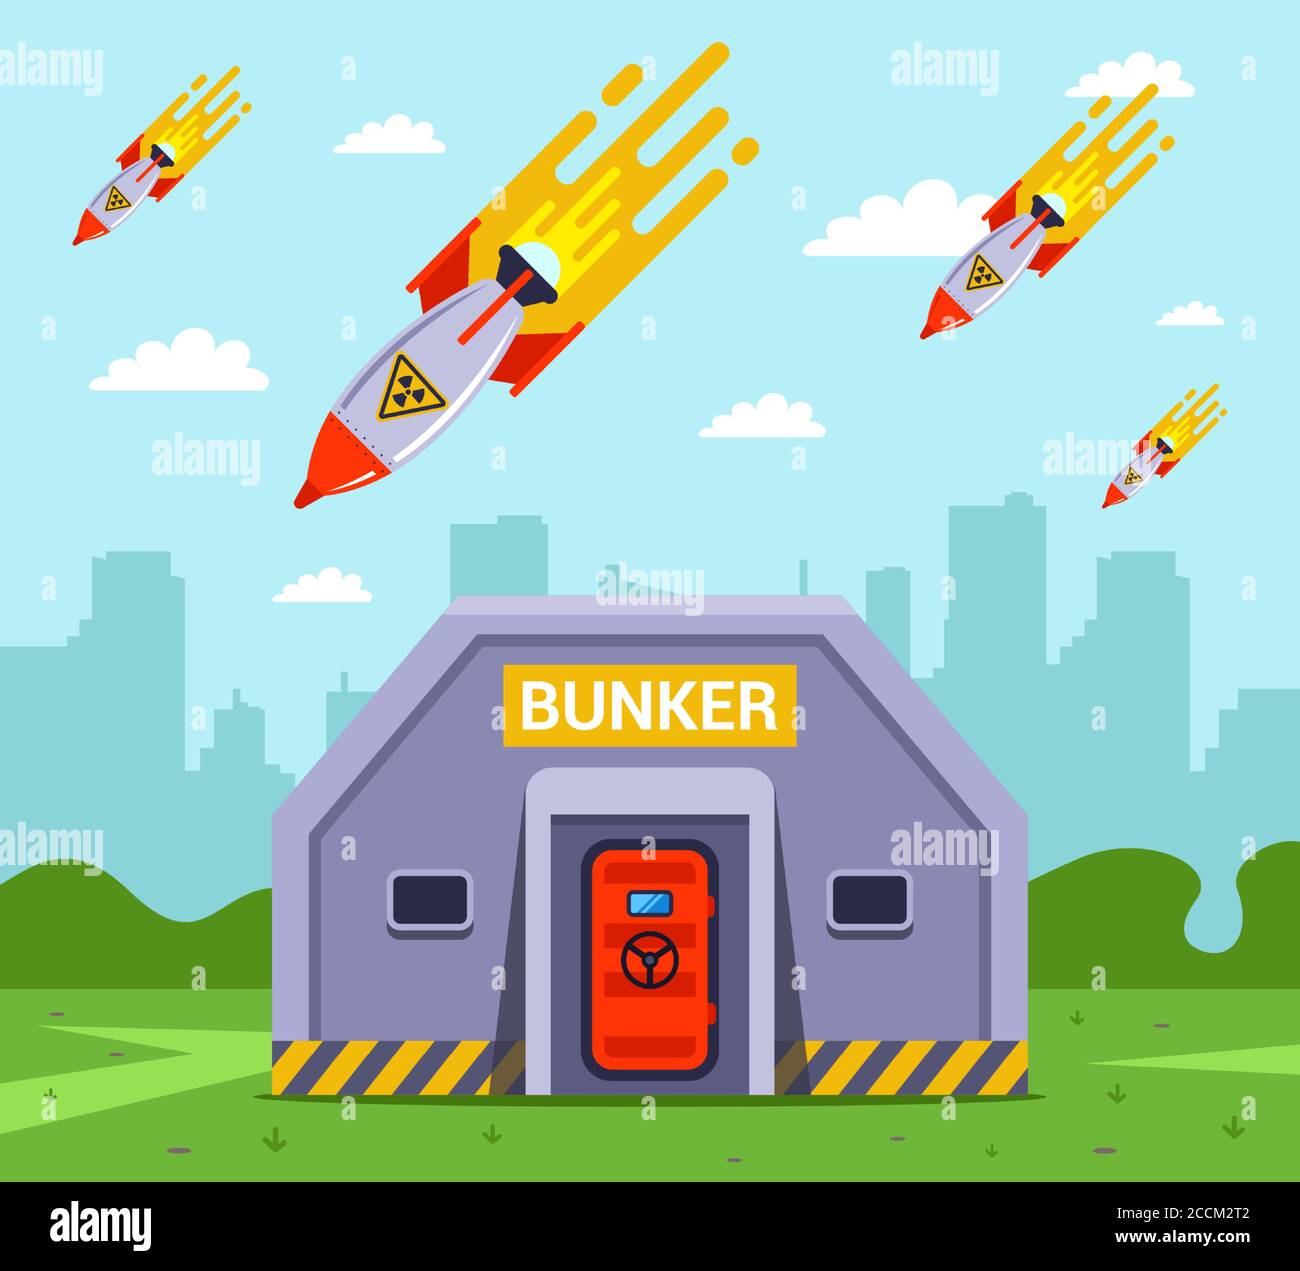 the fall of nuclear bombs on the city. rescue people in bunkers from missiles. flat vector illustration Stock Vector